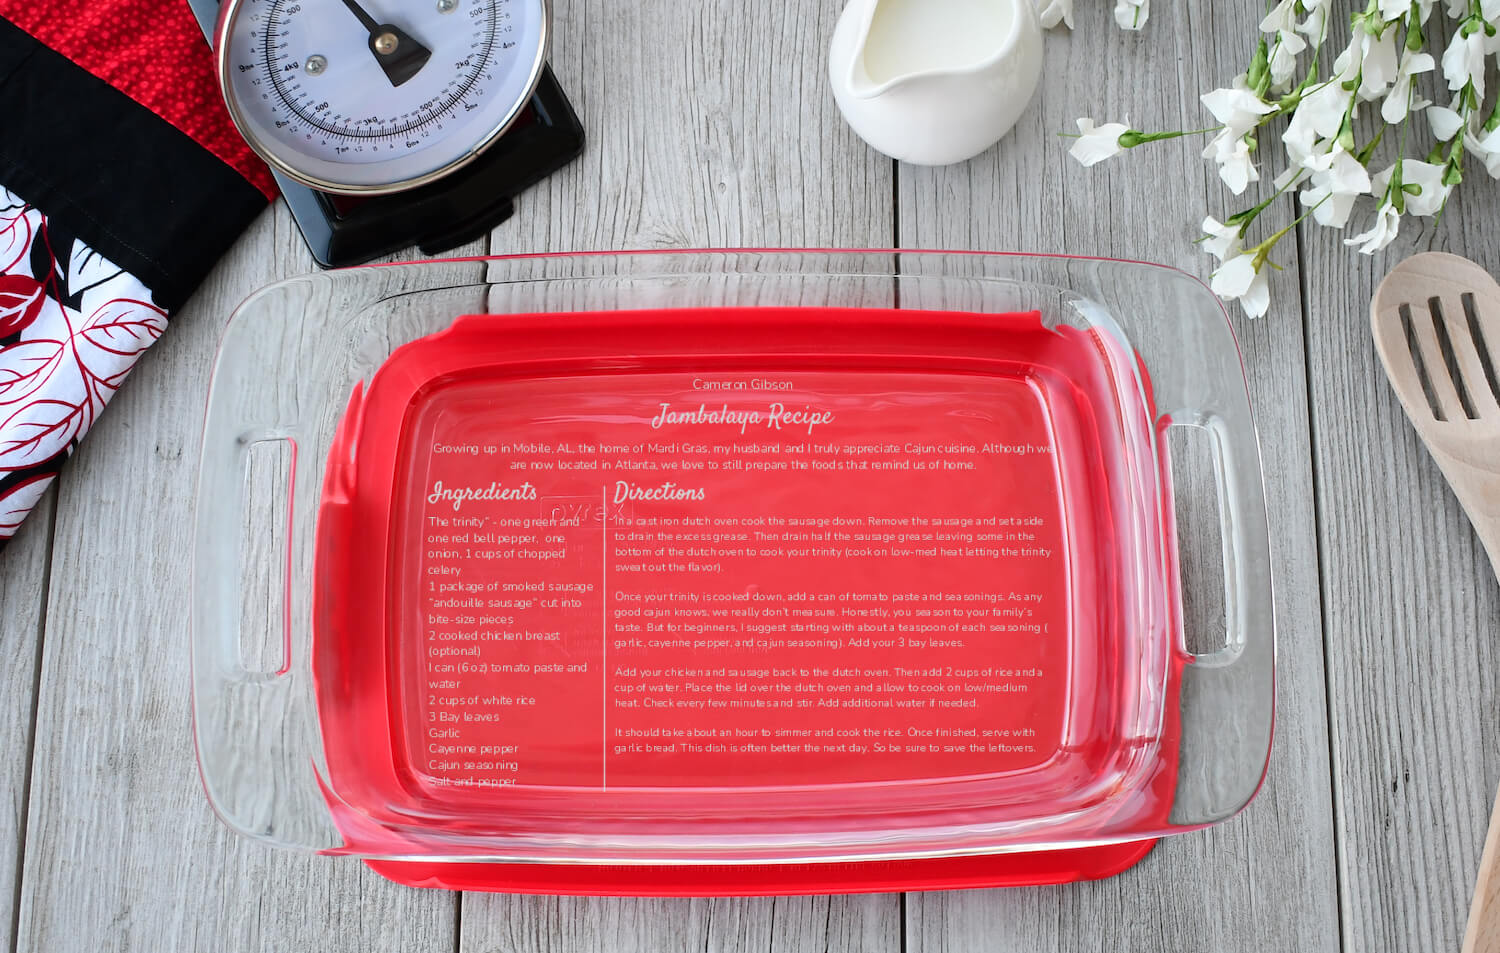 Personalized Monogrammed 9x13 Pyrex baking dish - Waverly Glass Works &  Engraving